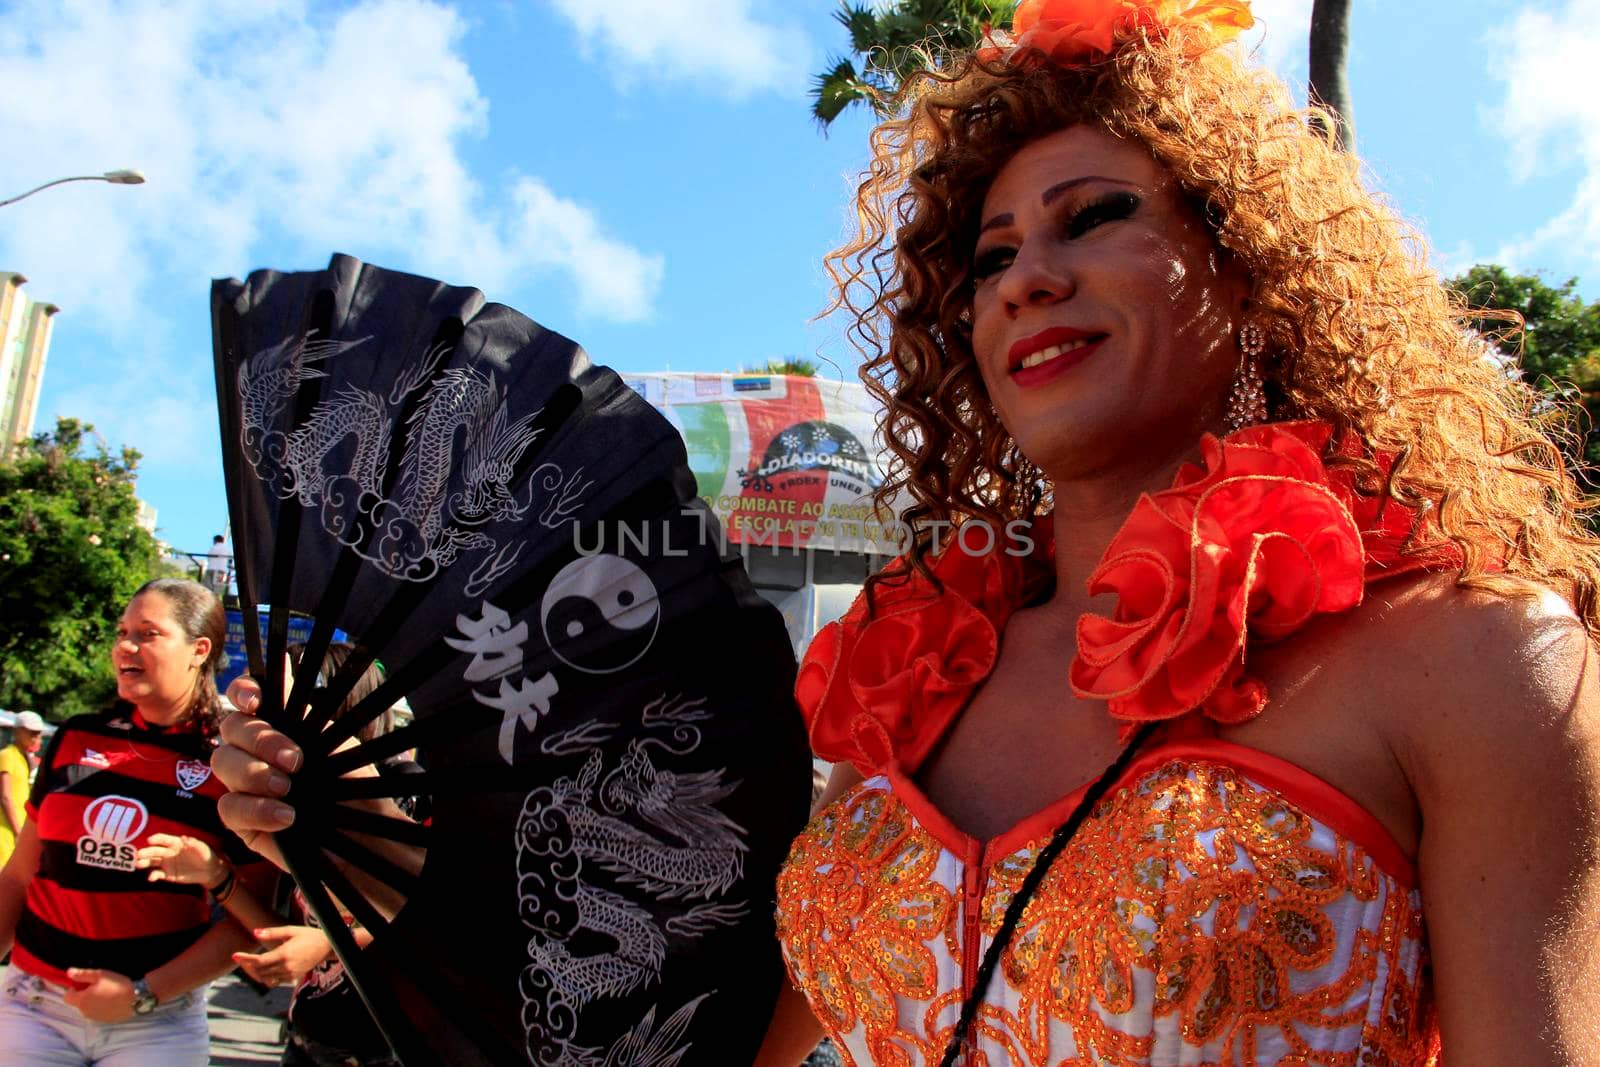 salvador, bahia / brazil - september 8, 2013: people are seen during gay pride parade in the city of Salvador.